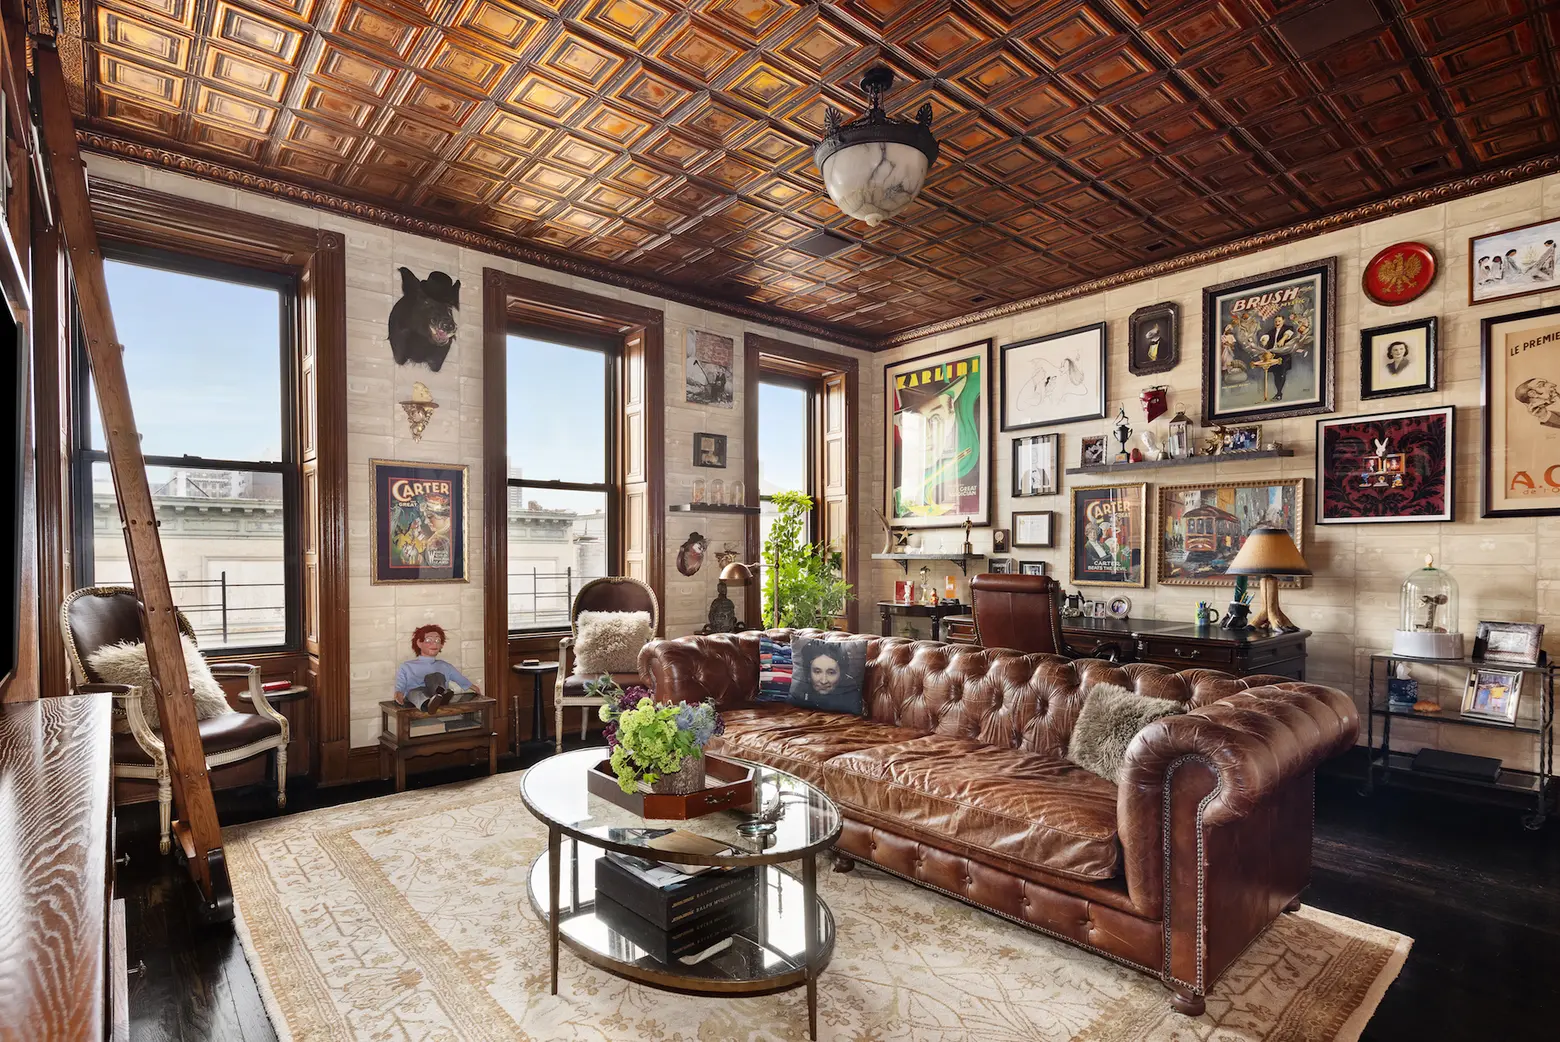 Neil Patrick Harris and David Burtka fetch $6.99M for five-story townhouse, a new record for Harlem